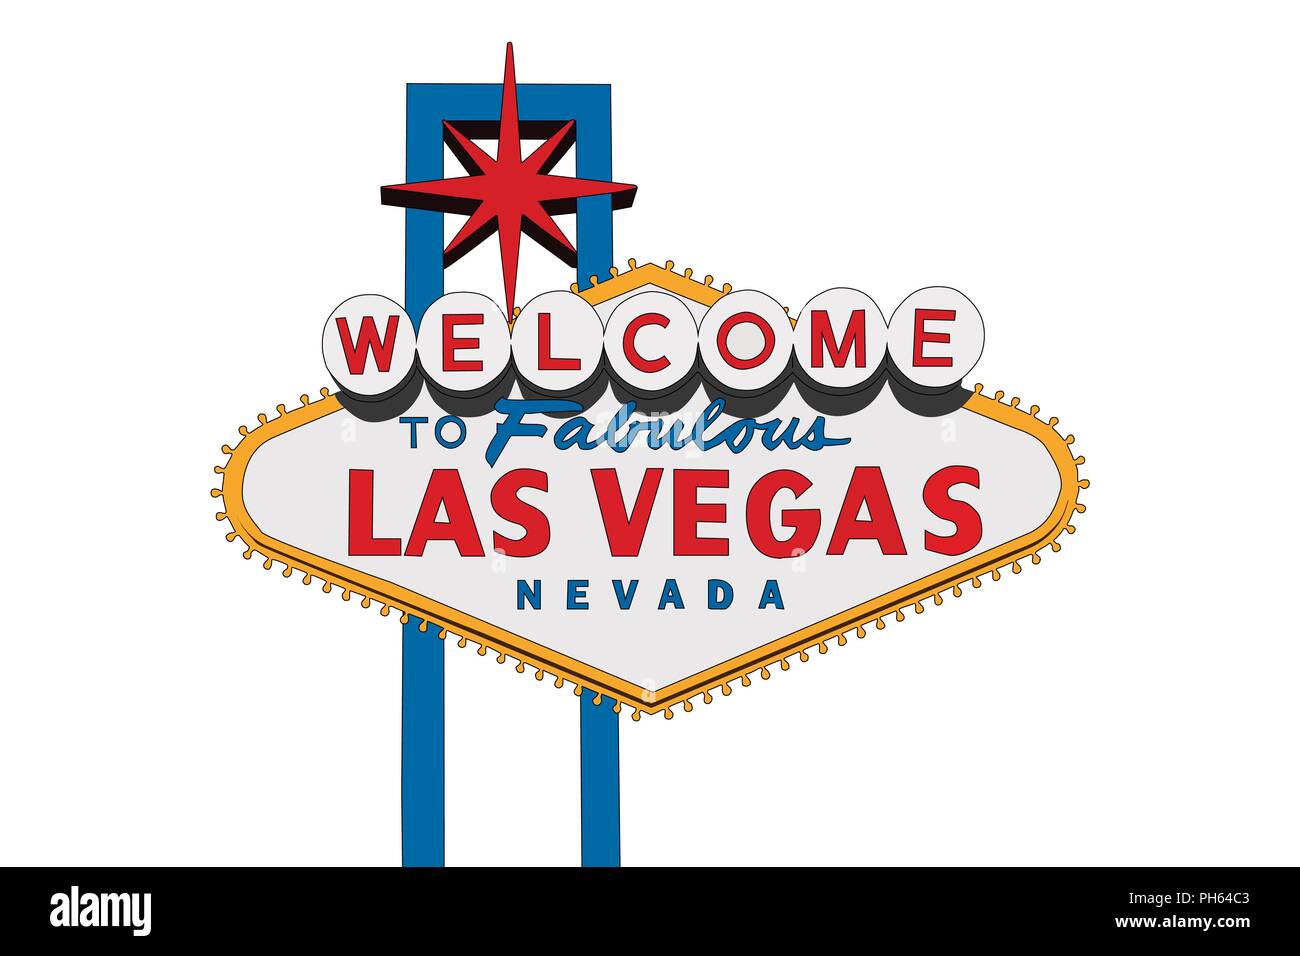 Las Vegas Nevada Welcome Sign Vector Illustration Isolated On White